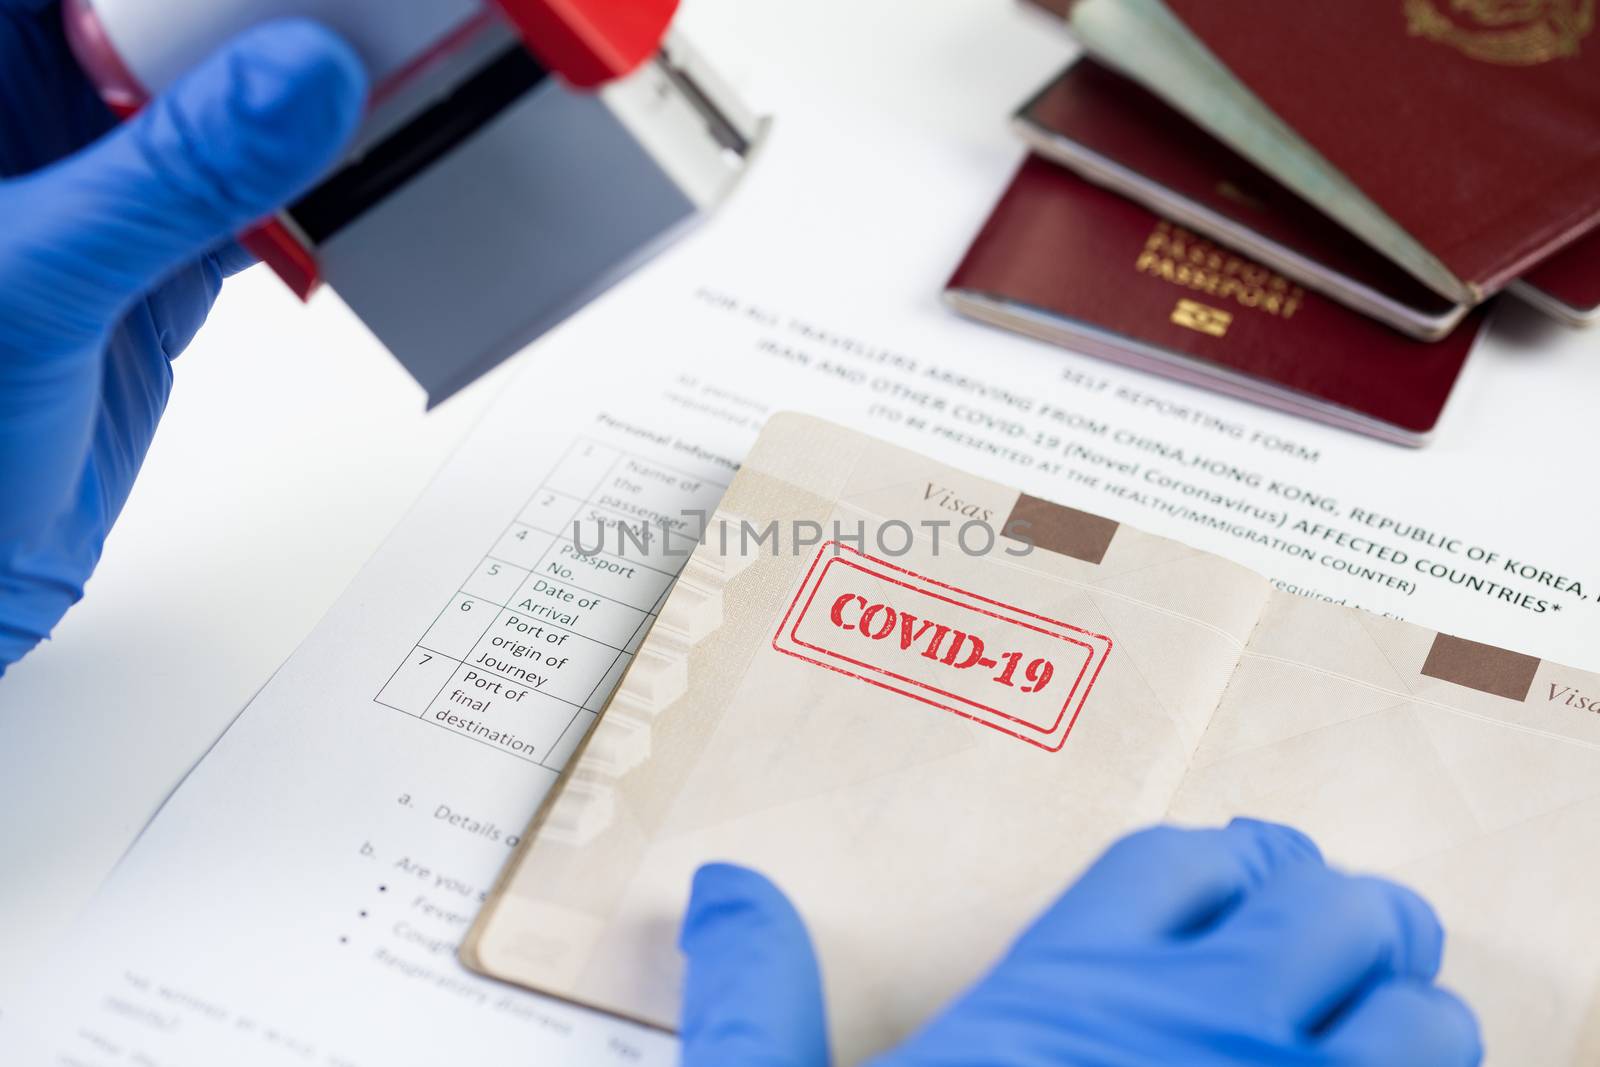 COVID-19 stamped in passport,airport border customs health and safety security check,restrictive no entry measures due to COVID-19 corona virus disease epidemic,Coronavirus global pandemic,US & UK 